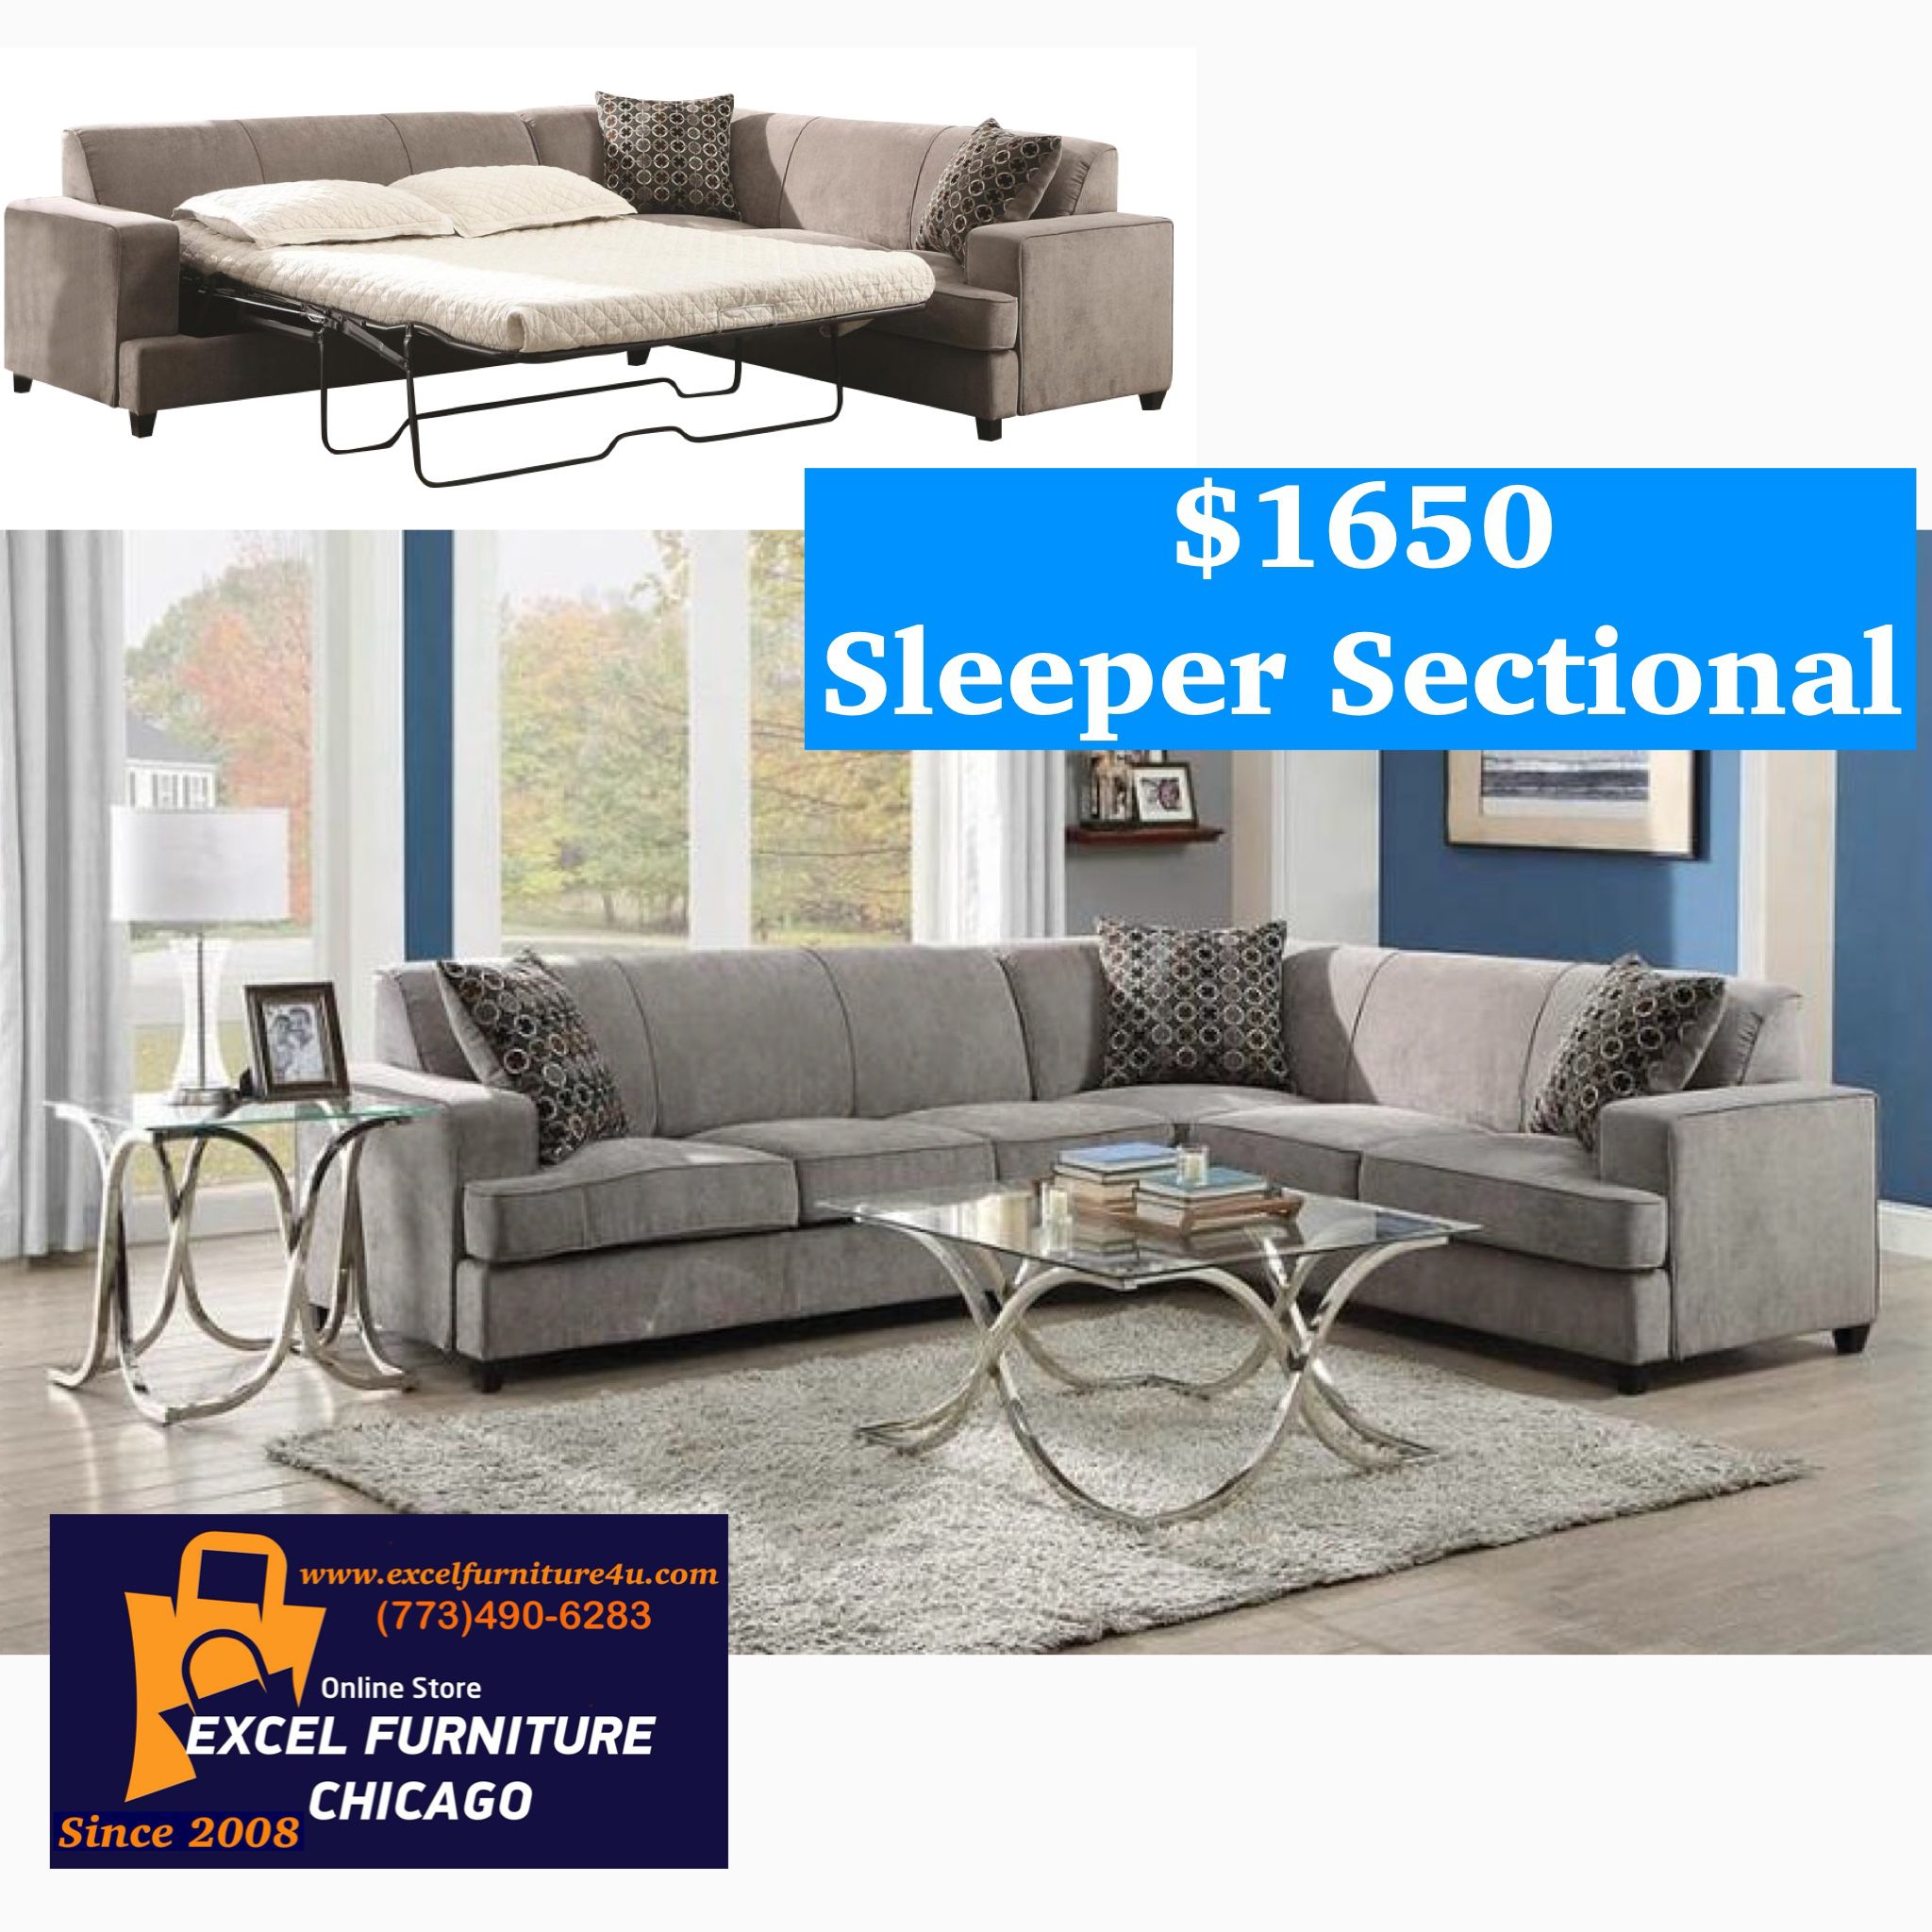 Brand New Sleeper Sectional Sofa Couch 